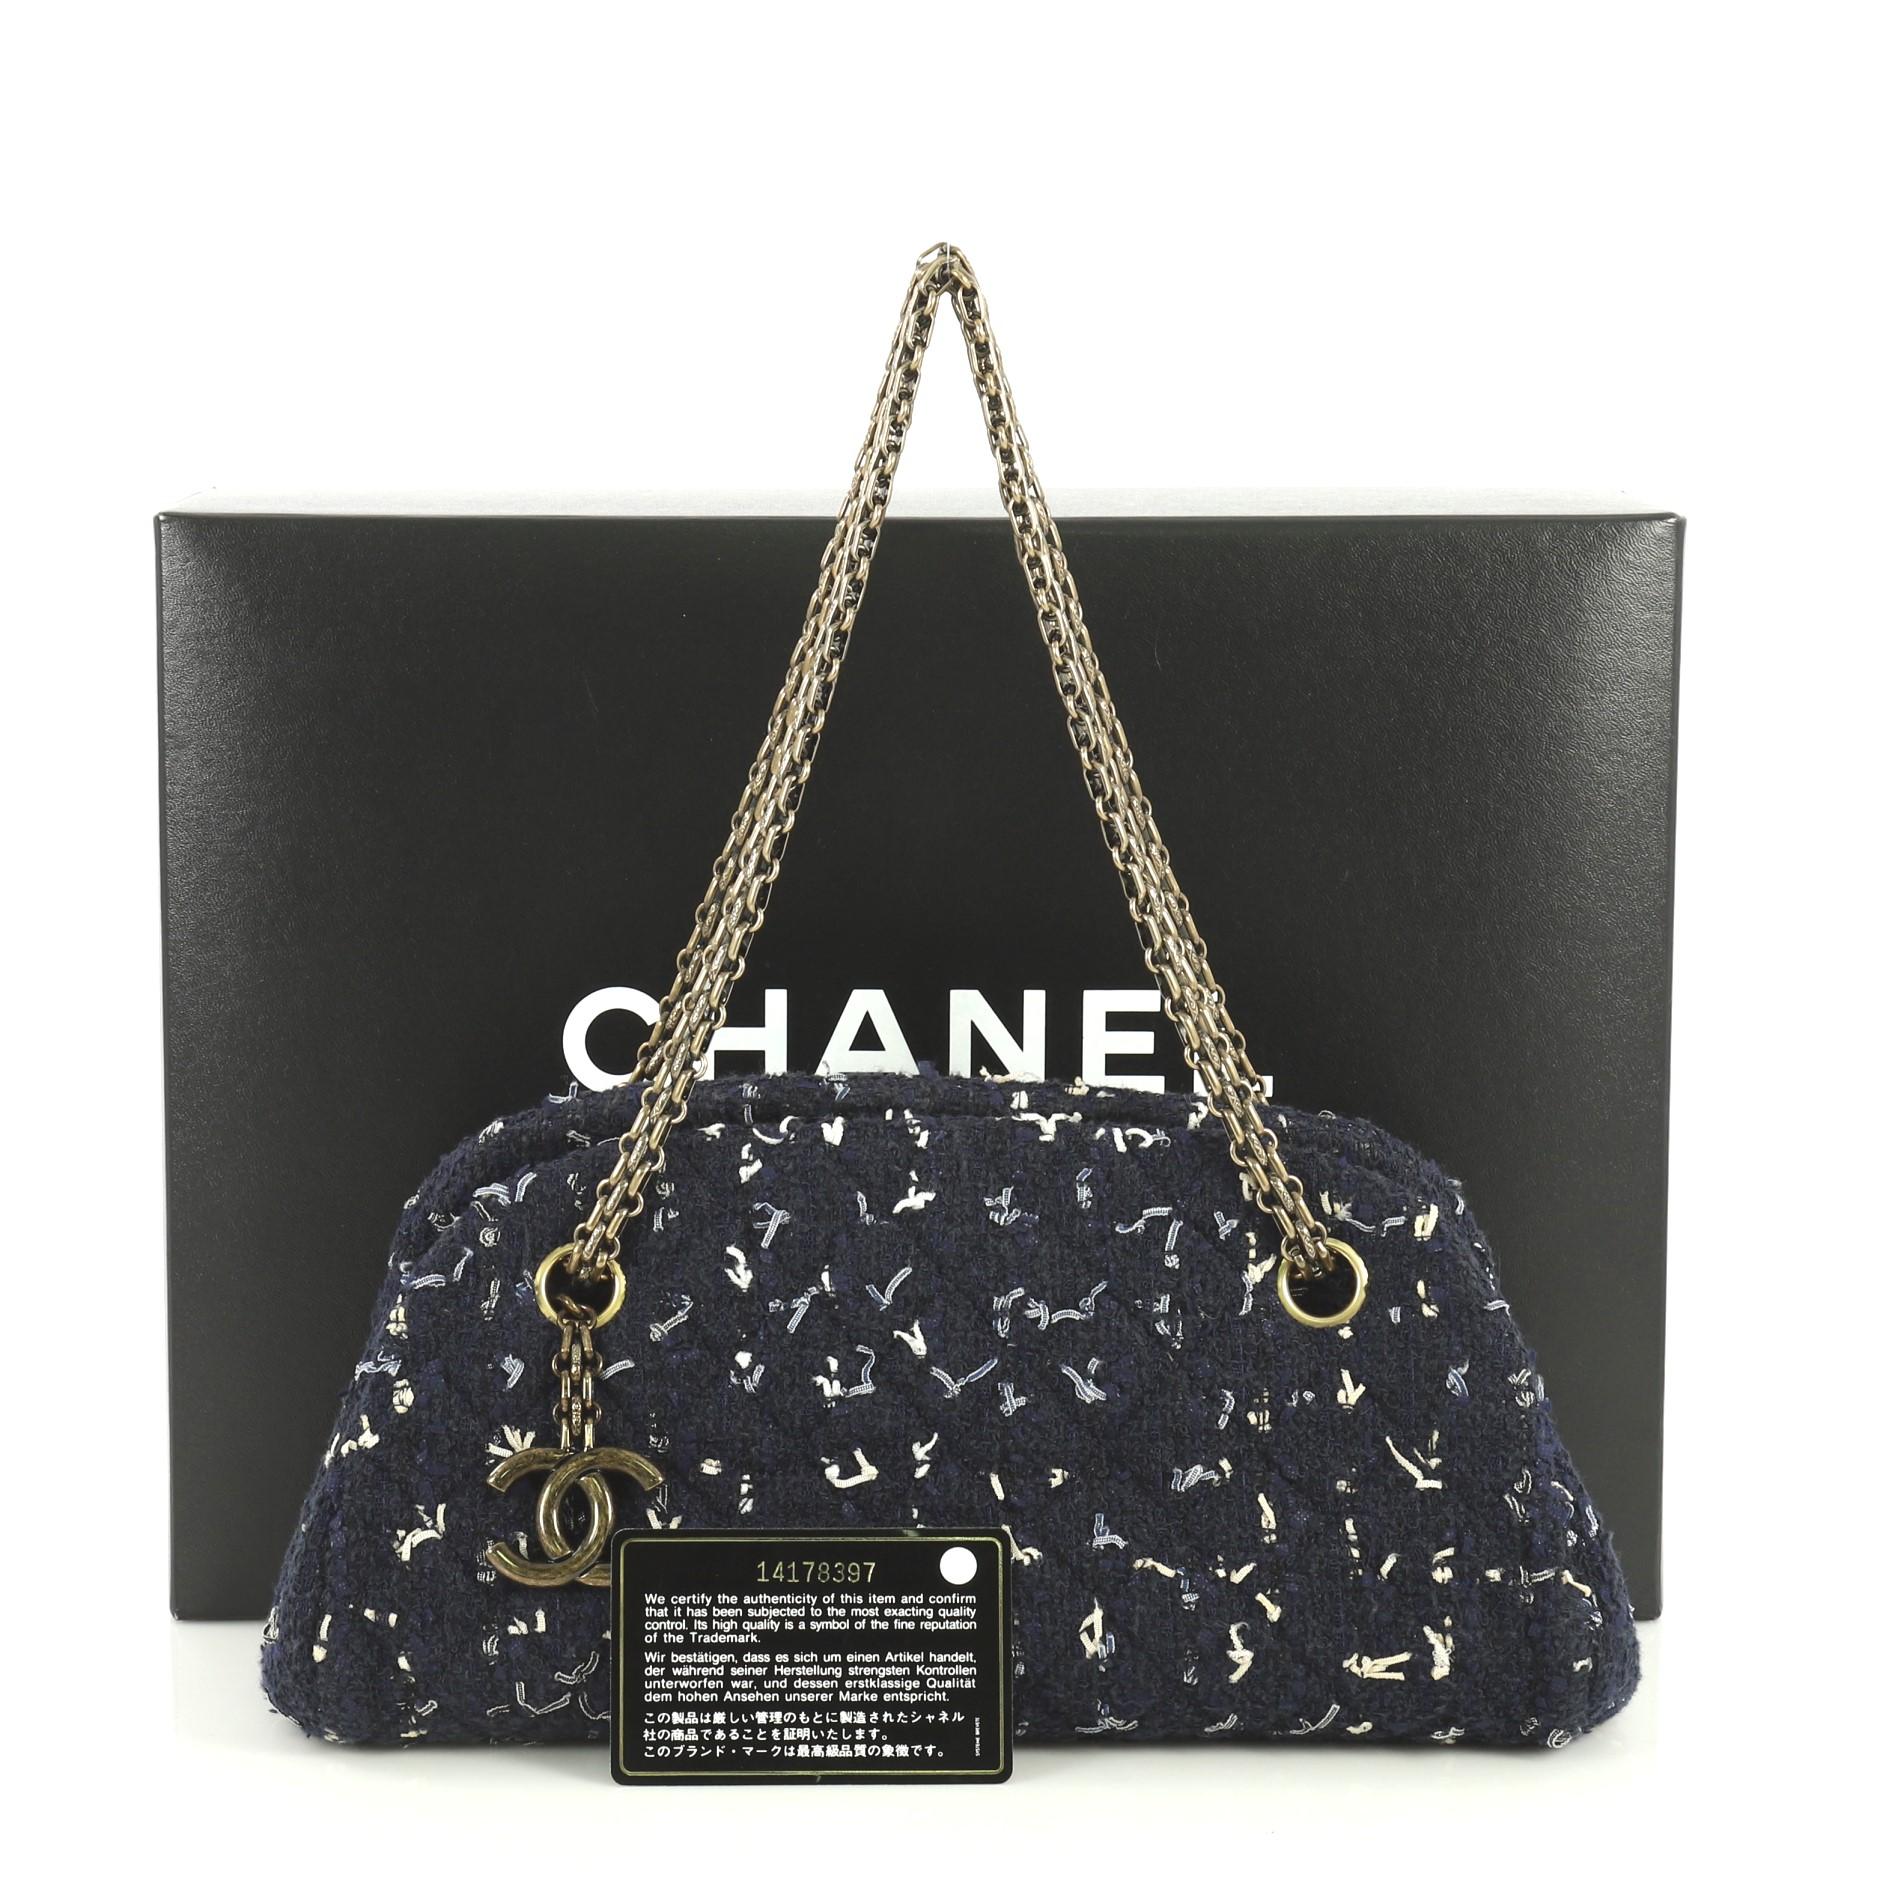 This Chanel Just Mademoiselle Bag Tweed Small, crafted from blue tweed, features gold-tone Chanel reissue chain, diamond stitch pattern, interlocking CC logo charm and aged gold-tone hardware. Its wide open top opens to a blue leather interior with